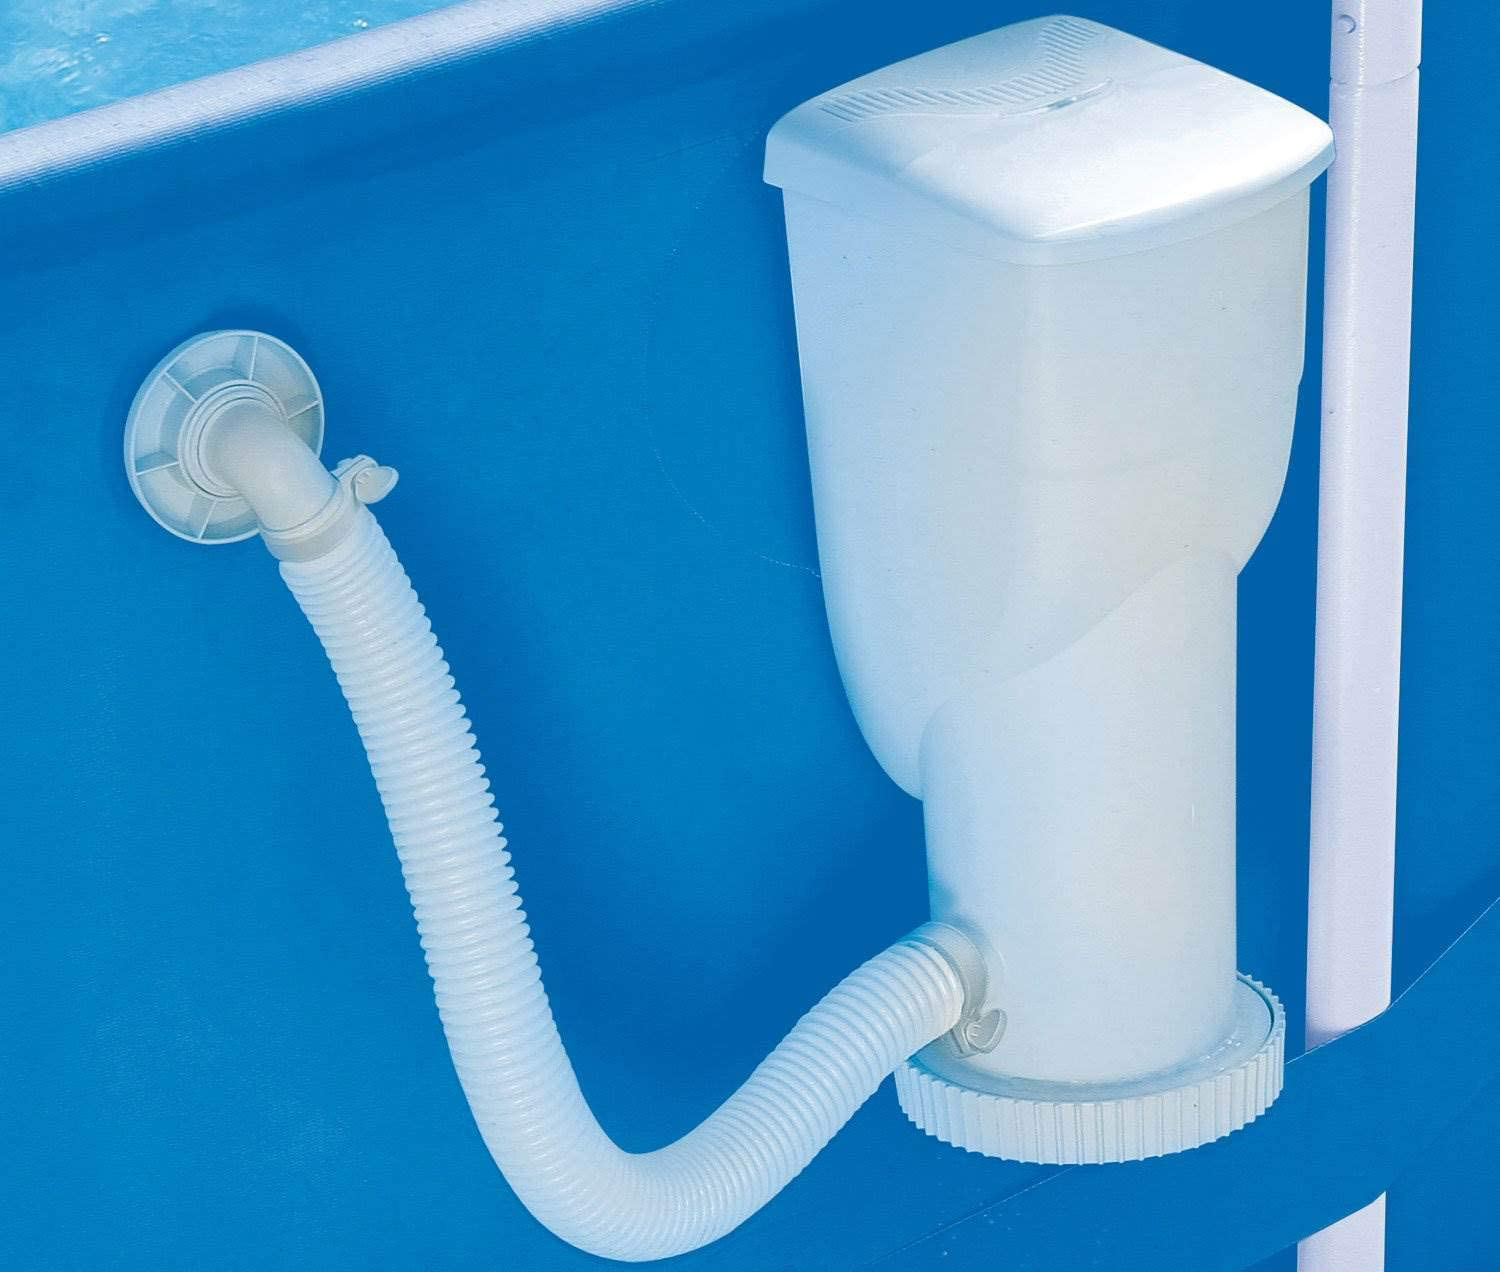 The best above-ground pool filter option installed in the wall of an above-ground pool